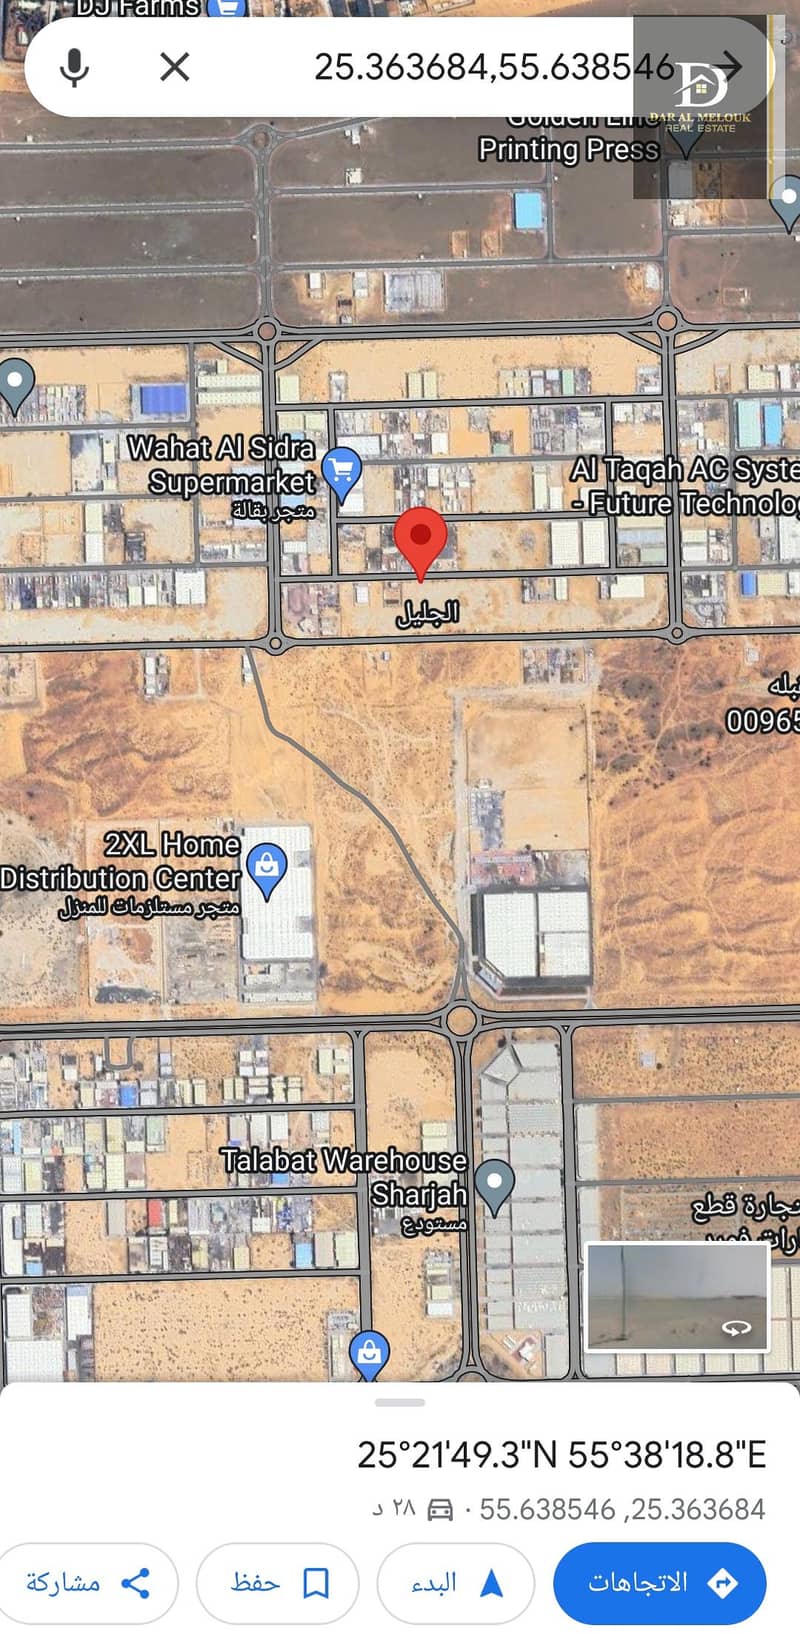 Hello
 For sale. . 3 lands next to each other in one row
 In the new compassion

 Block 2

 Next to the mosque. . 

 Each plot is 14,531 feet

 Total area is 43,593 feet

 The final price for 3 pieces is 4,000,000 dirhams

 Selling for 3 pieces together

 (I